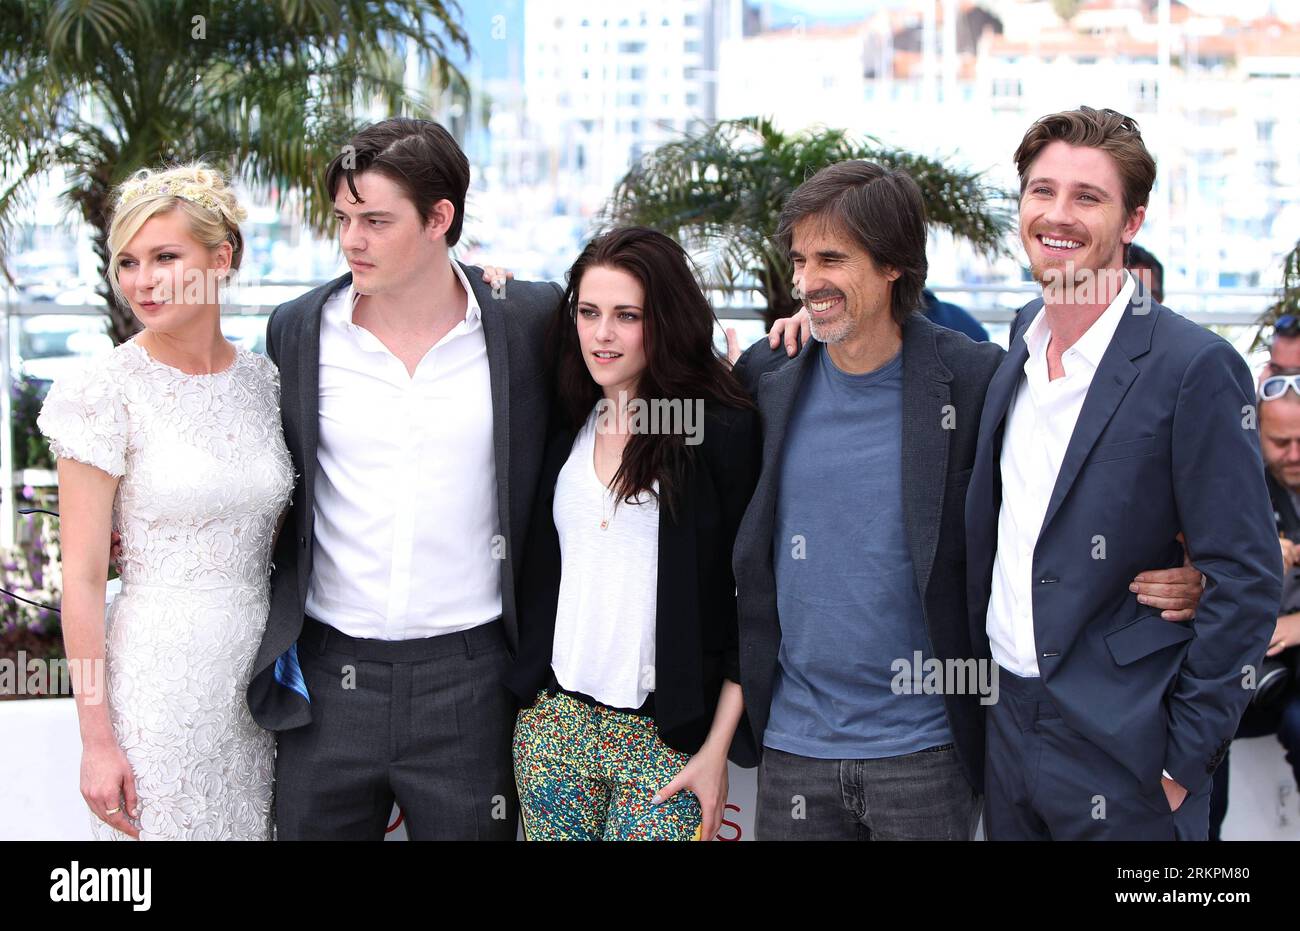 Bildnummer: 58021985  Datum: 23.05.2012  Copyright: imago/Xinhua (120523) -- CANNES, May 23, 2012 (Xinhua) -- (L-R) US actress Kirsten Dunst, British actor Sam Riley, US actress Kristen Stewart, Brazilian director Walter Salles and US actor Garrett Hedlund pose during a photocall for On The Road , at the 65th Cannes Film Festival, southern France, May 23, 2012. The film will compete with the other 21 feature films for 2012 Golden Palm (Palme d Or), the most prestigious award of the 65th Cannes International Film Festival. (Xinhua/Gao Jing) FRANCE-CANNES-FILM FESTIVAL-PHOTOCALL-ON THE ROAD PUBL Stock Photo